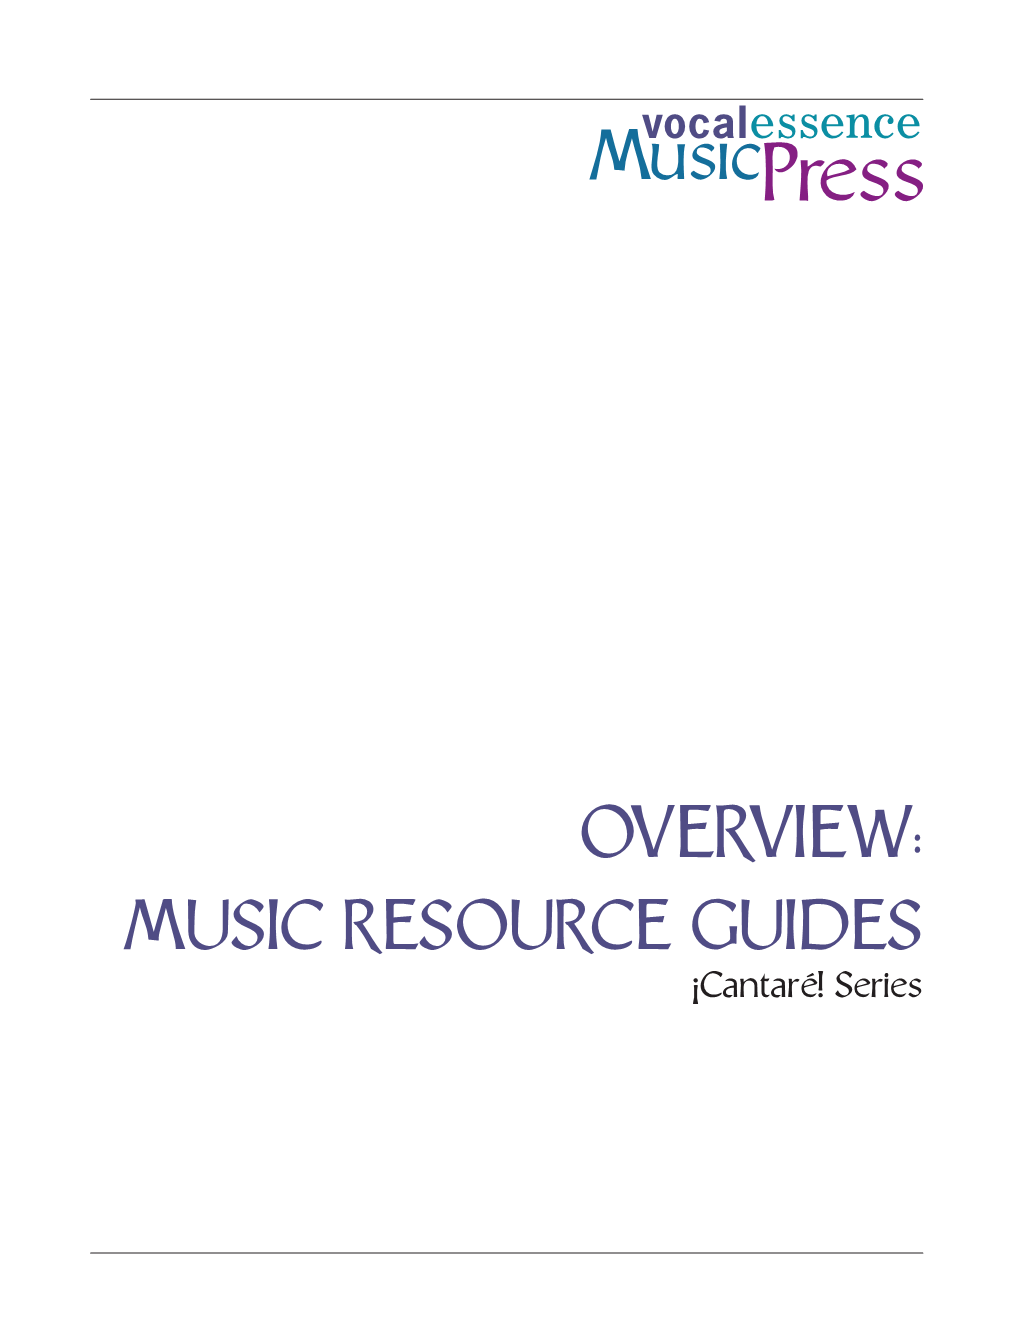 Overview: Music Resource Guides ¡Cantaré! Series